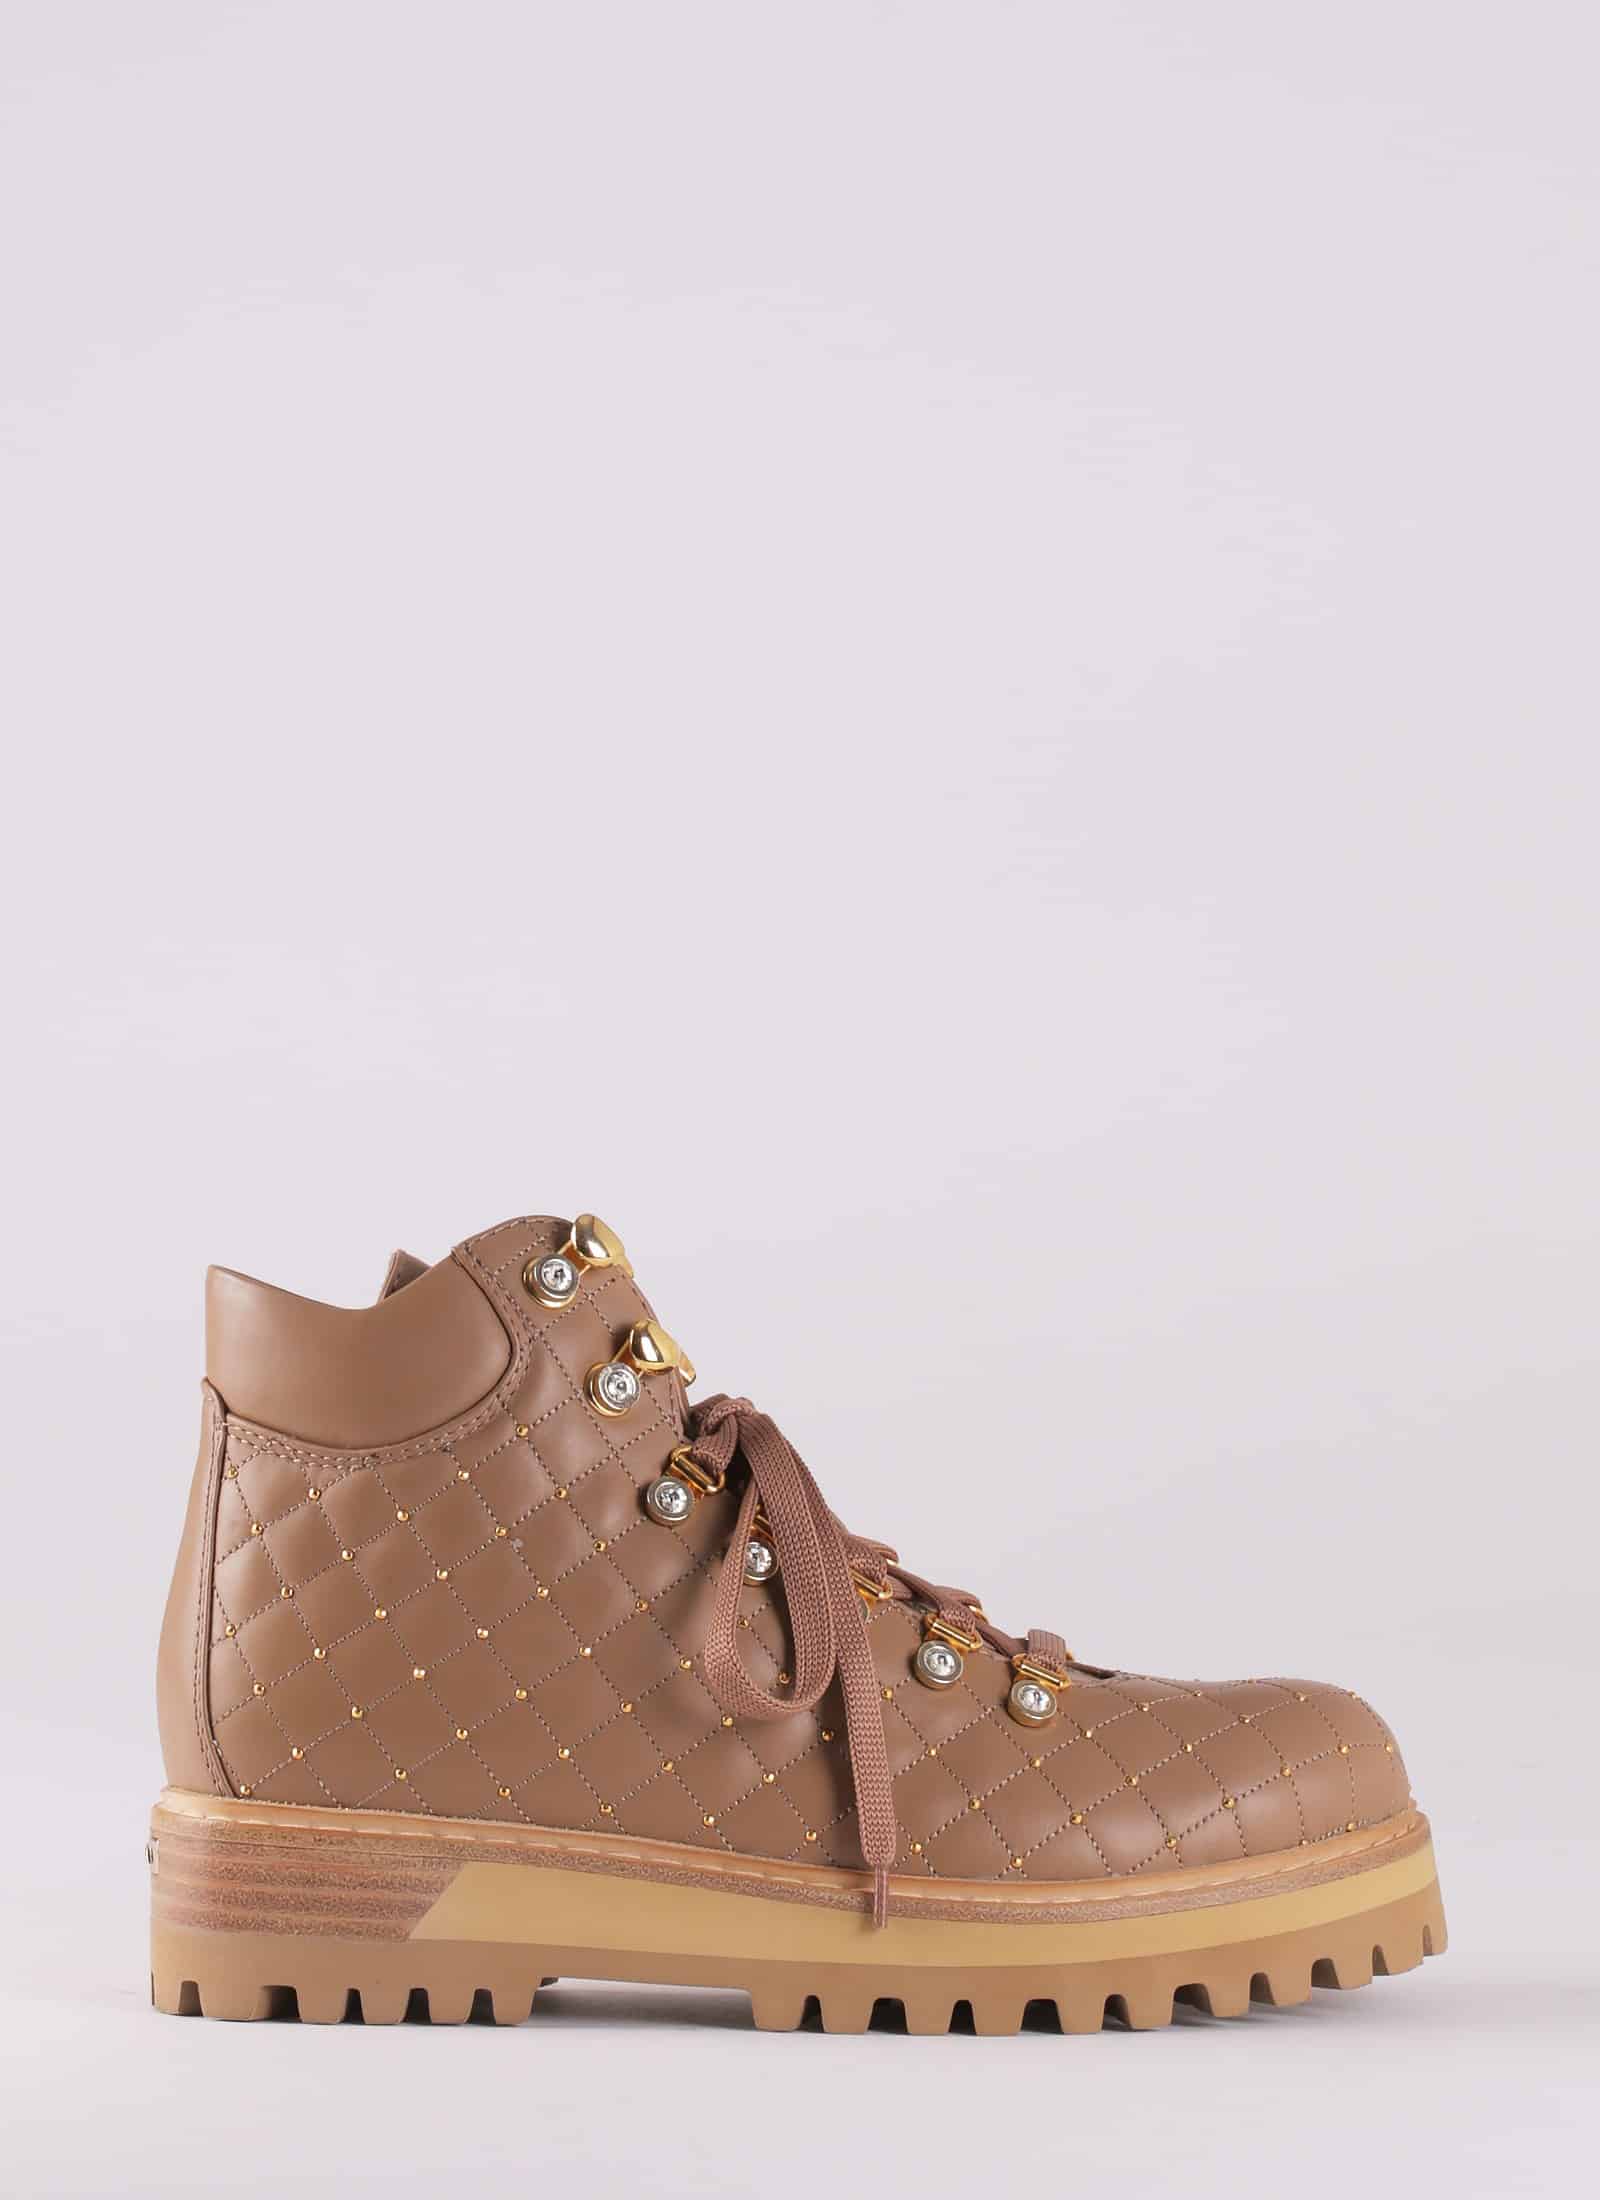 LEATHER HIKERS - LE SILLA